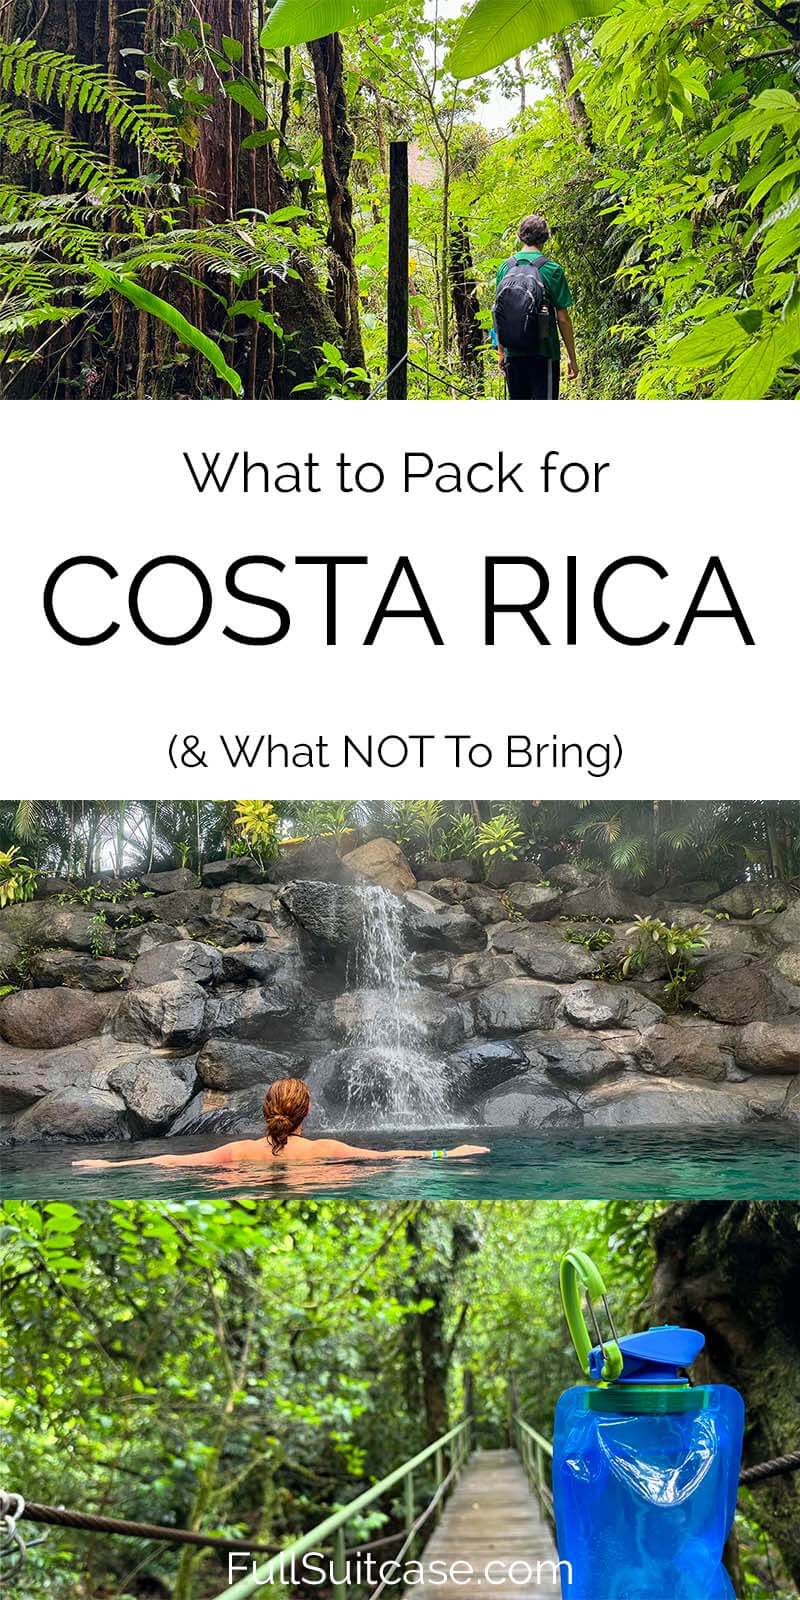 What to pack for a trip to Costa Rica